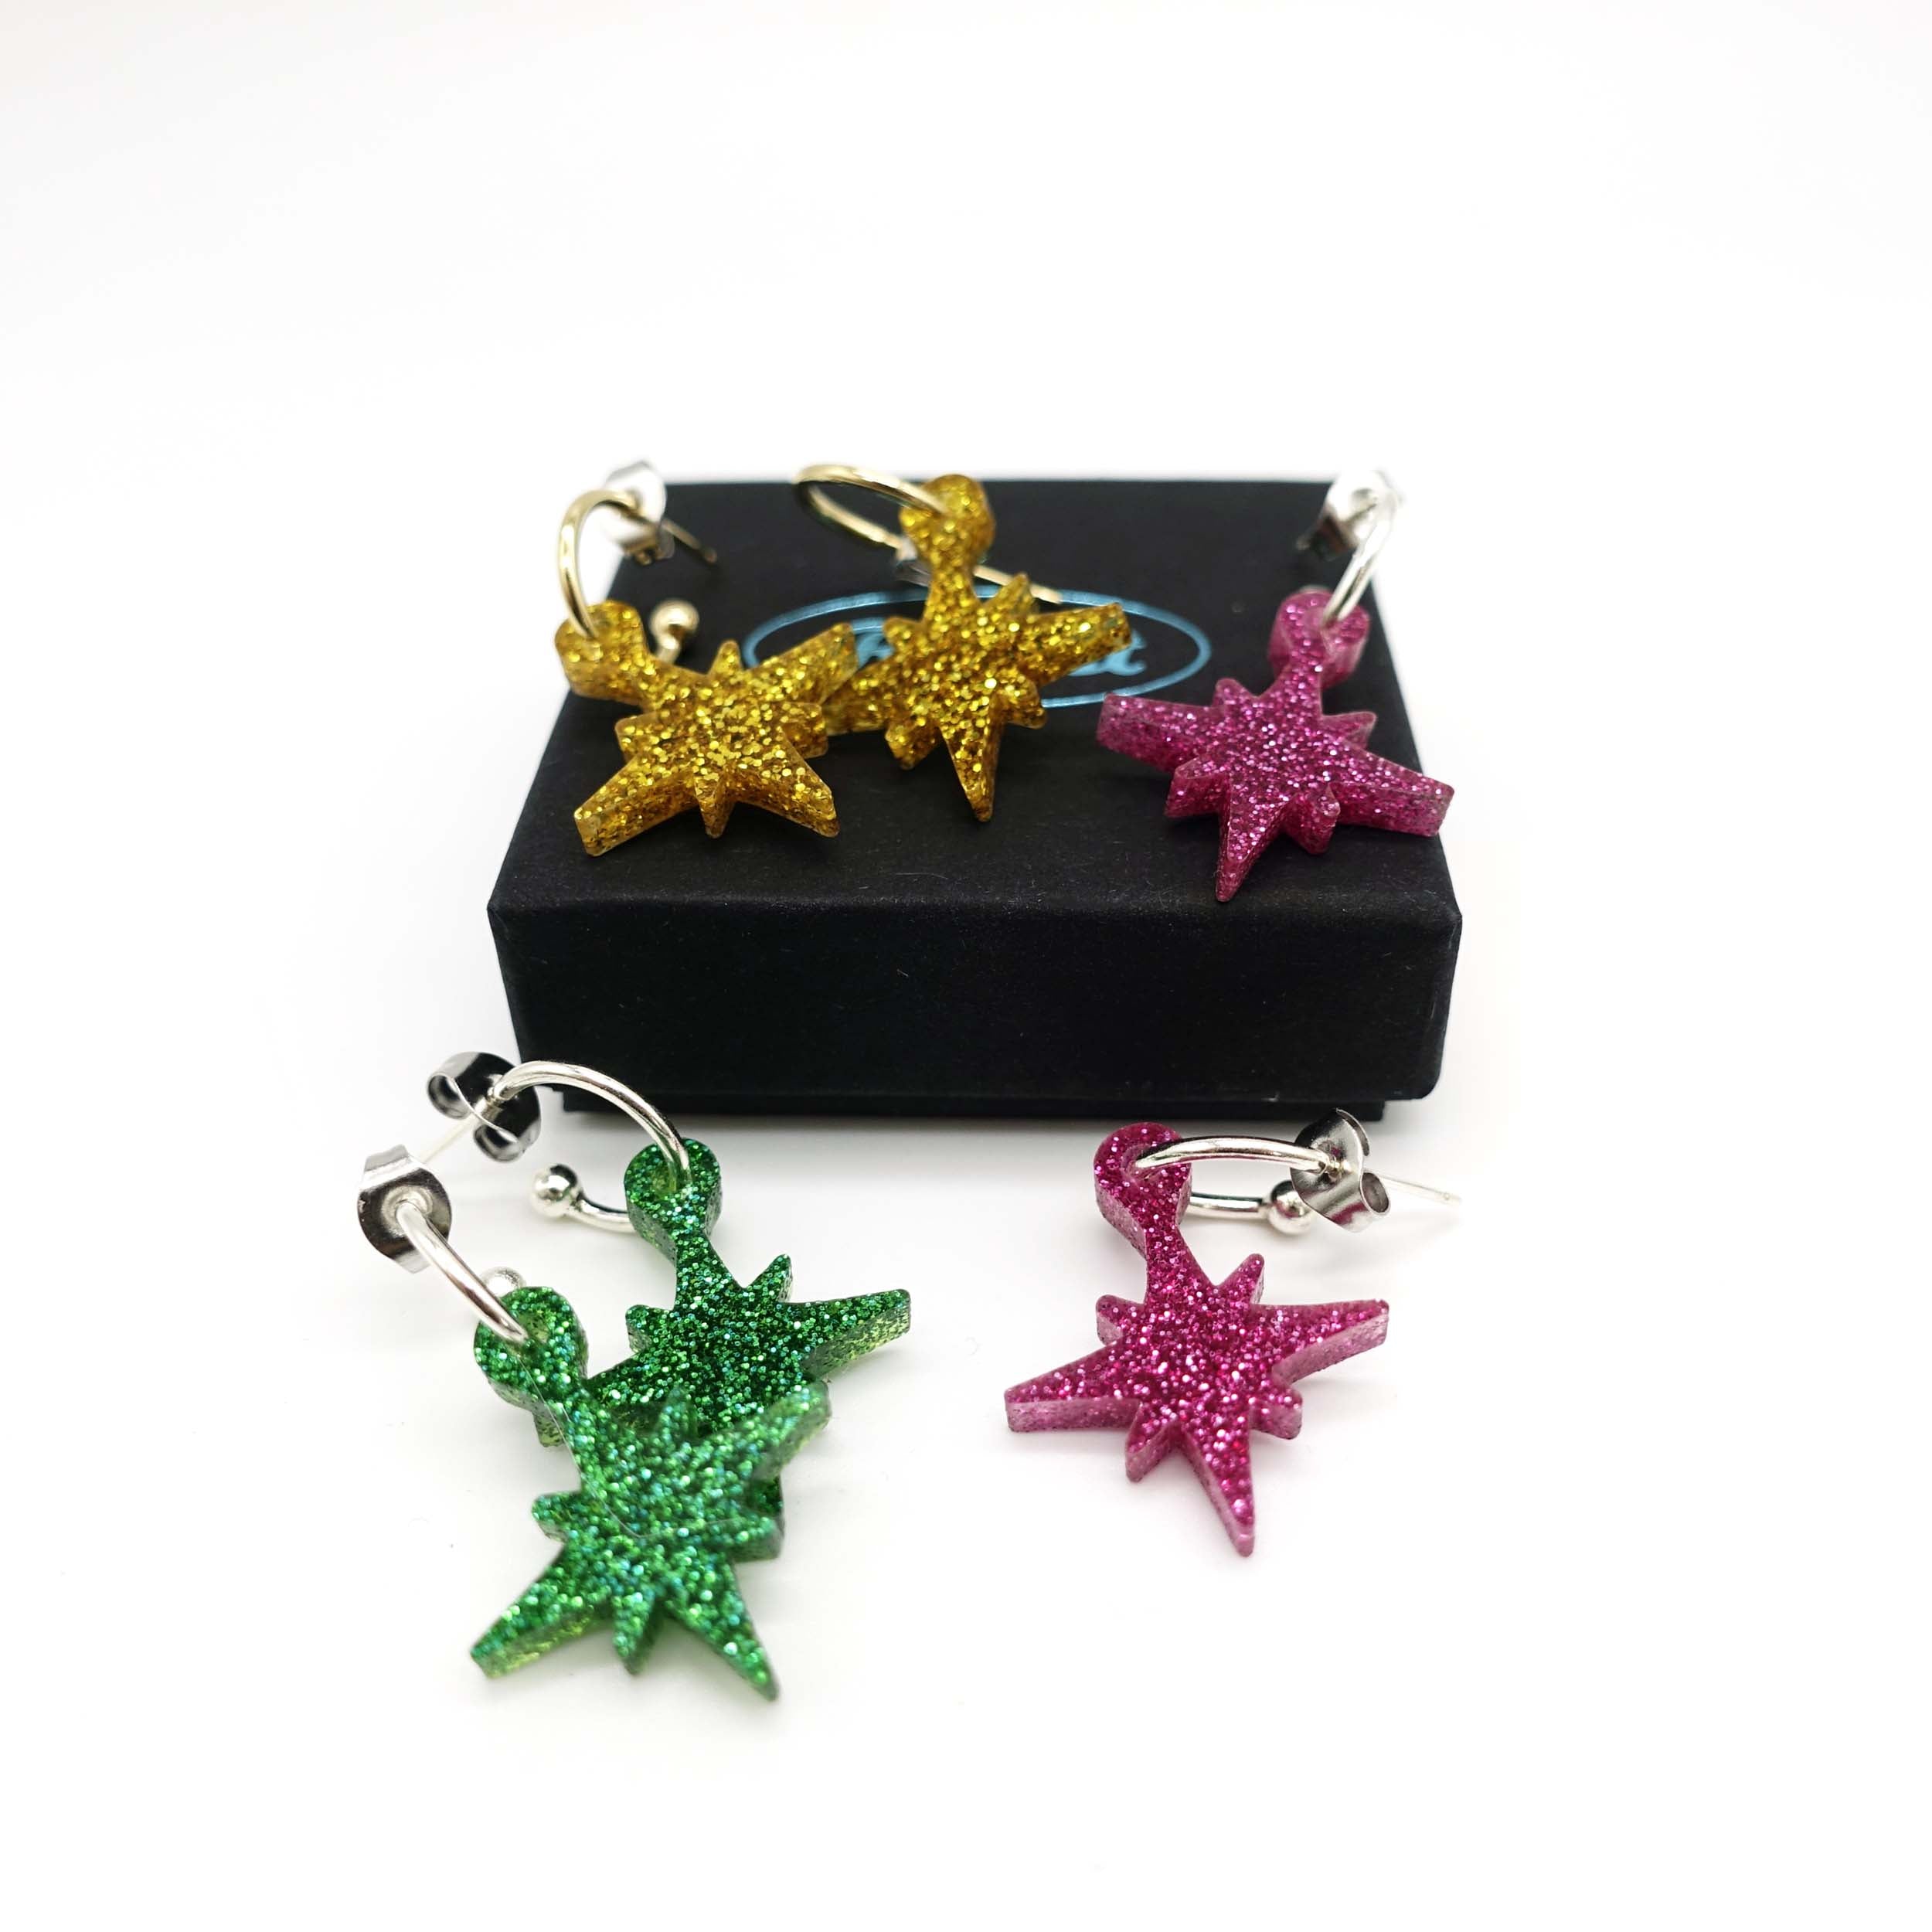 A group shot showing all three new colours of Vintage Star Christmas earring hoops with a Wear and Resist gift box. 